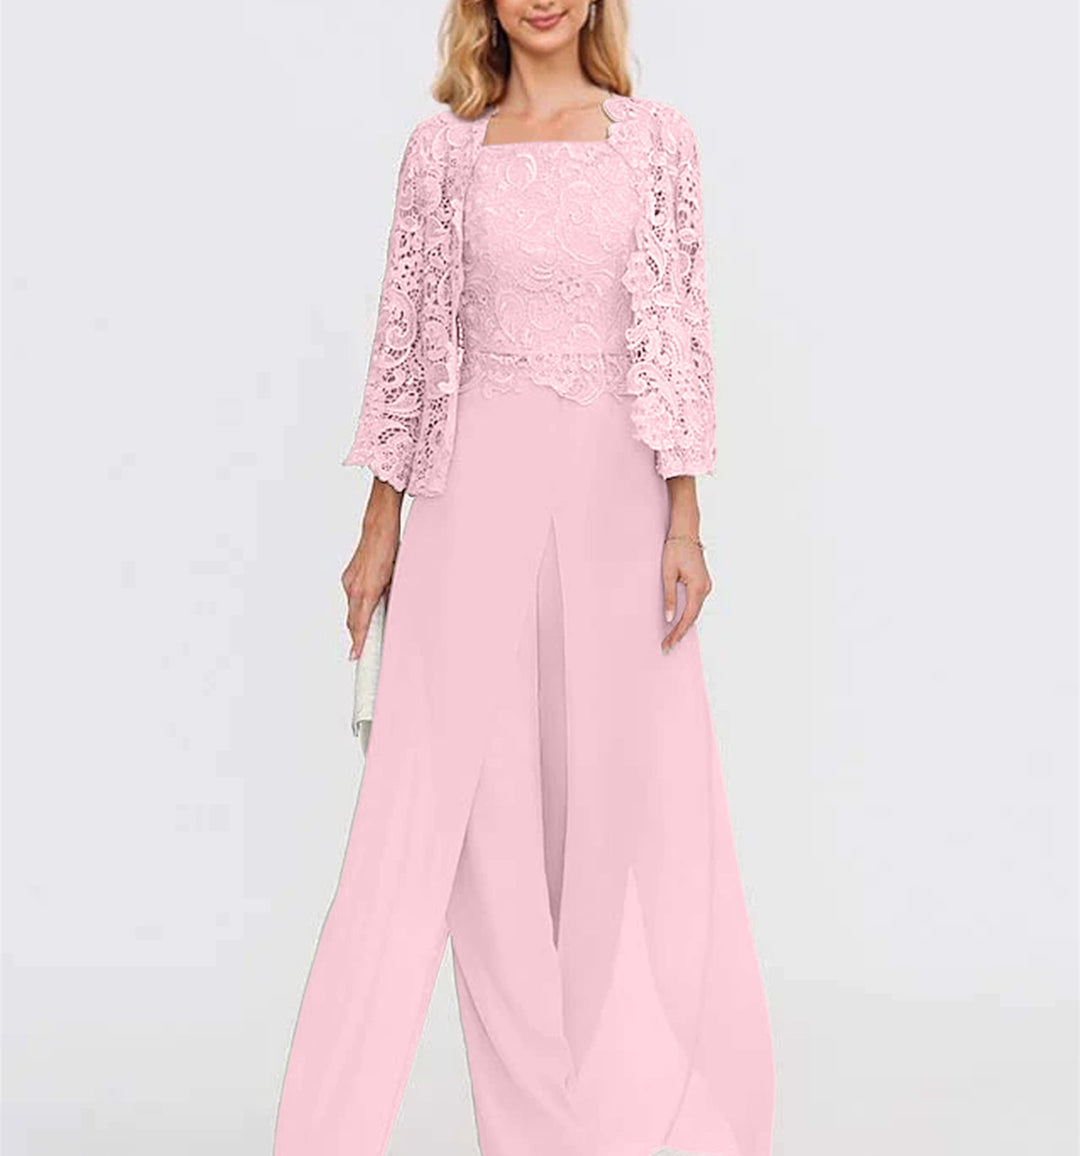 Chiffon Long Sleeves Mother of the Bride Pantsuits with Jacket & Lace